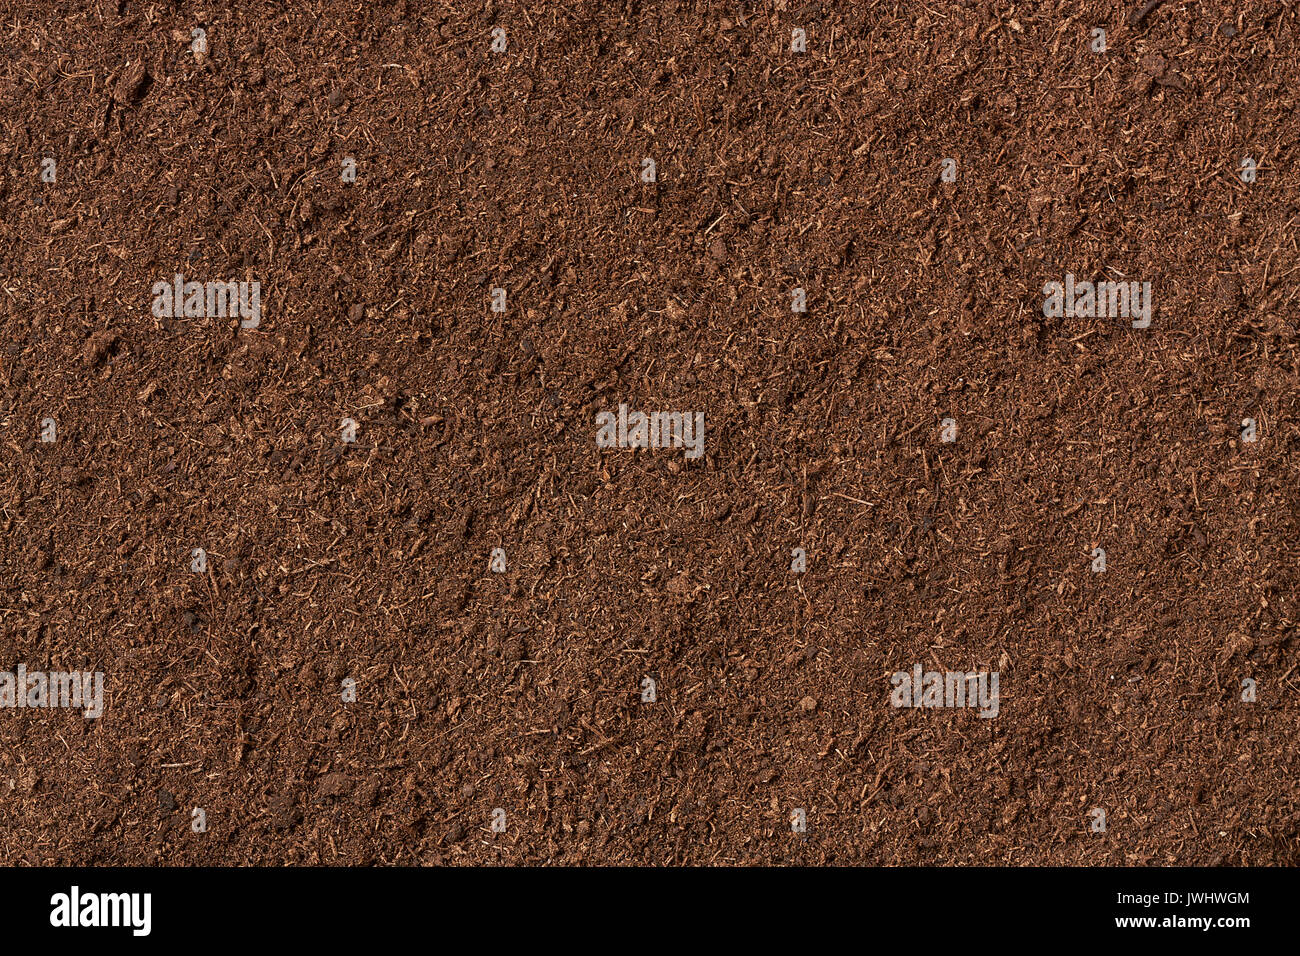 peat soil as a background, organic texture Stock Photo